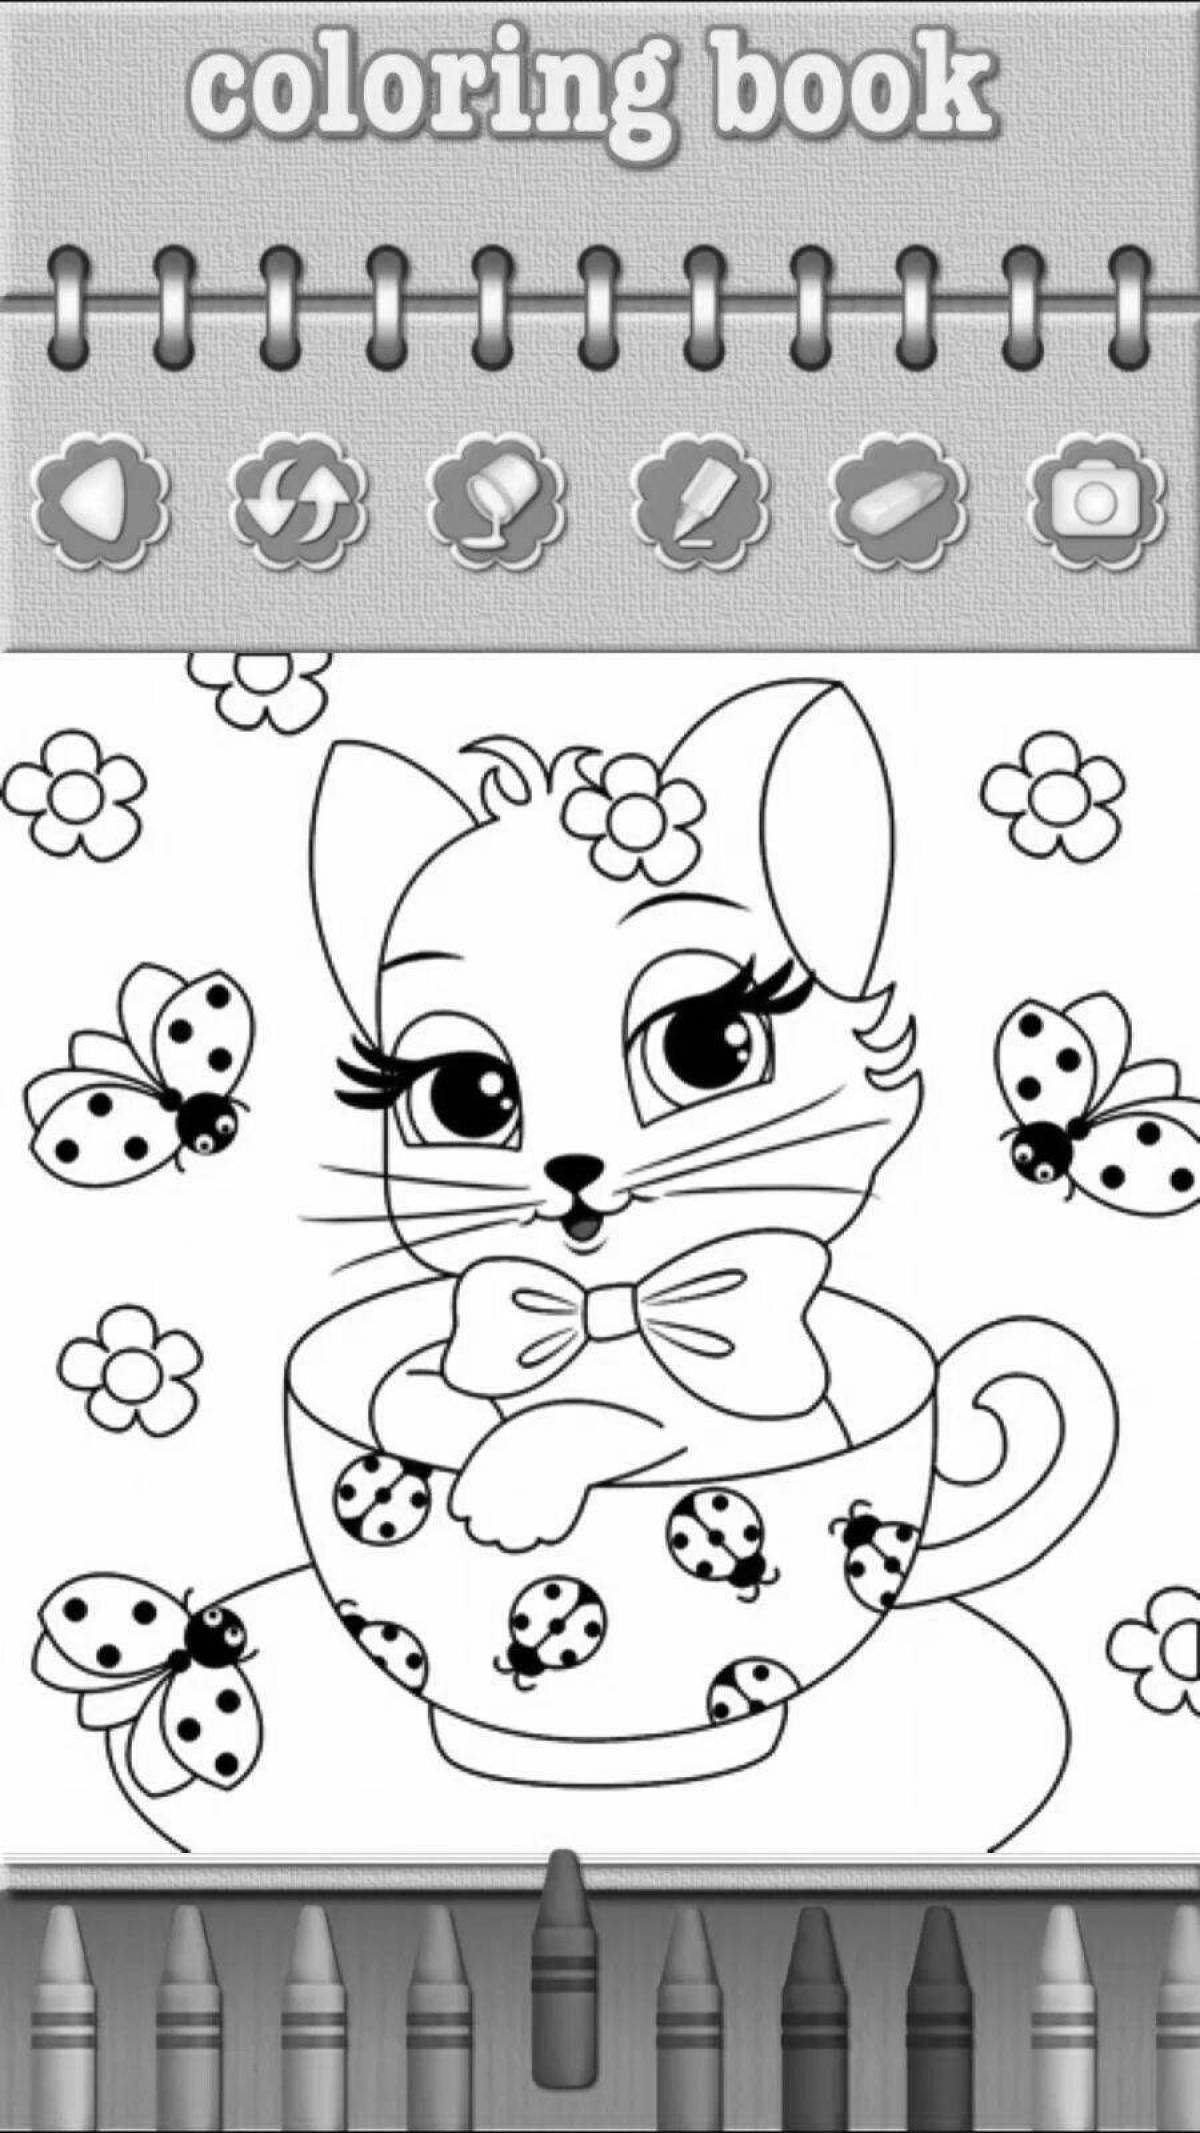 Adorable kitty coloring game